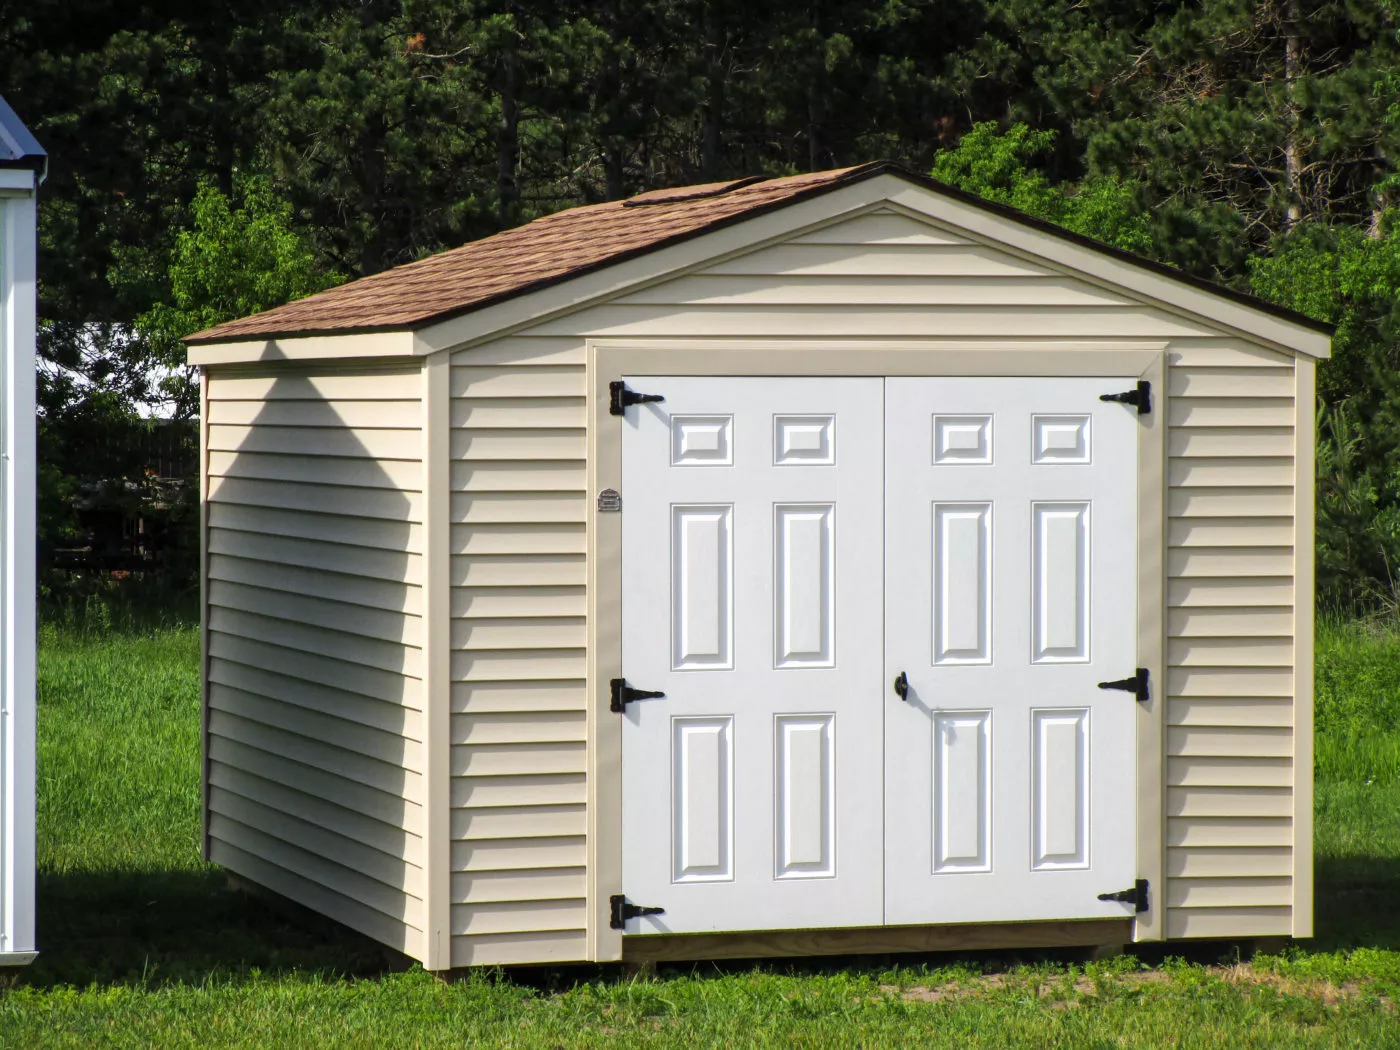 Utility Sheds For Sale In Sears, Michigan